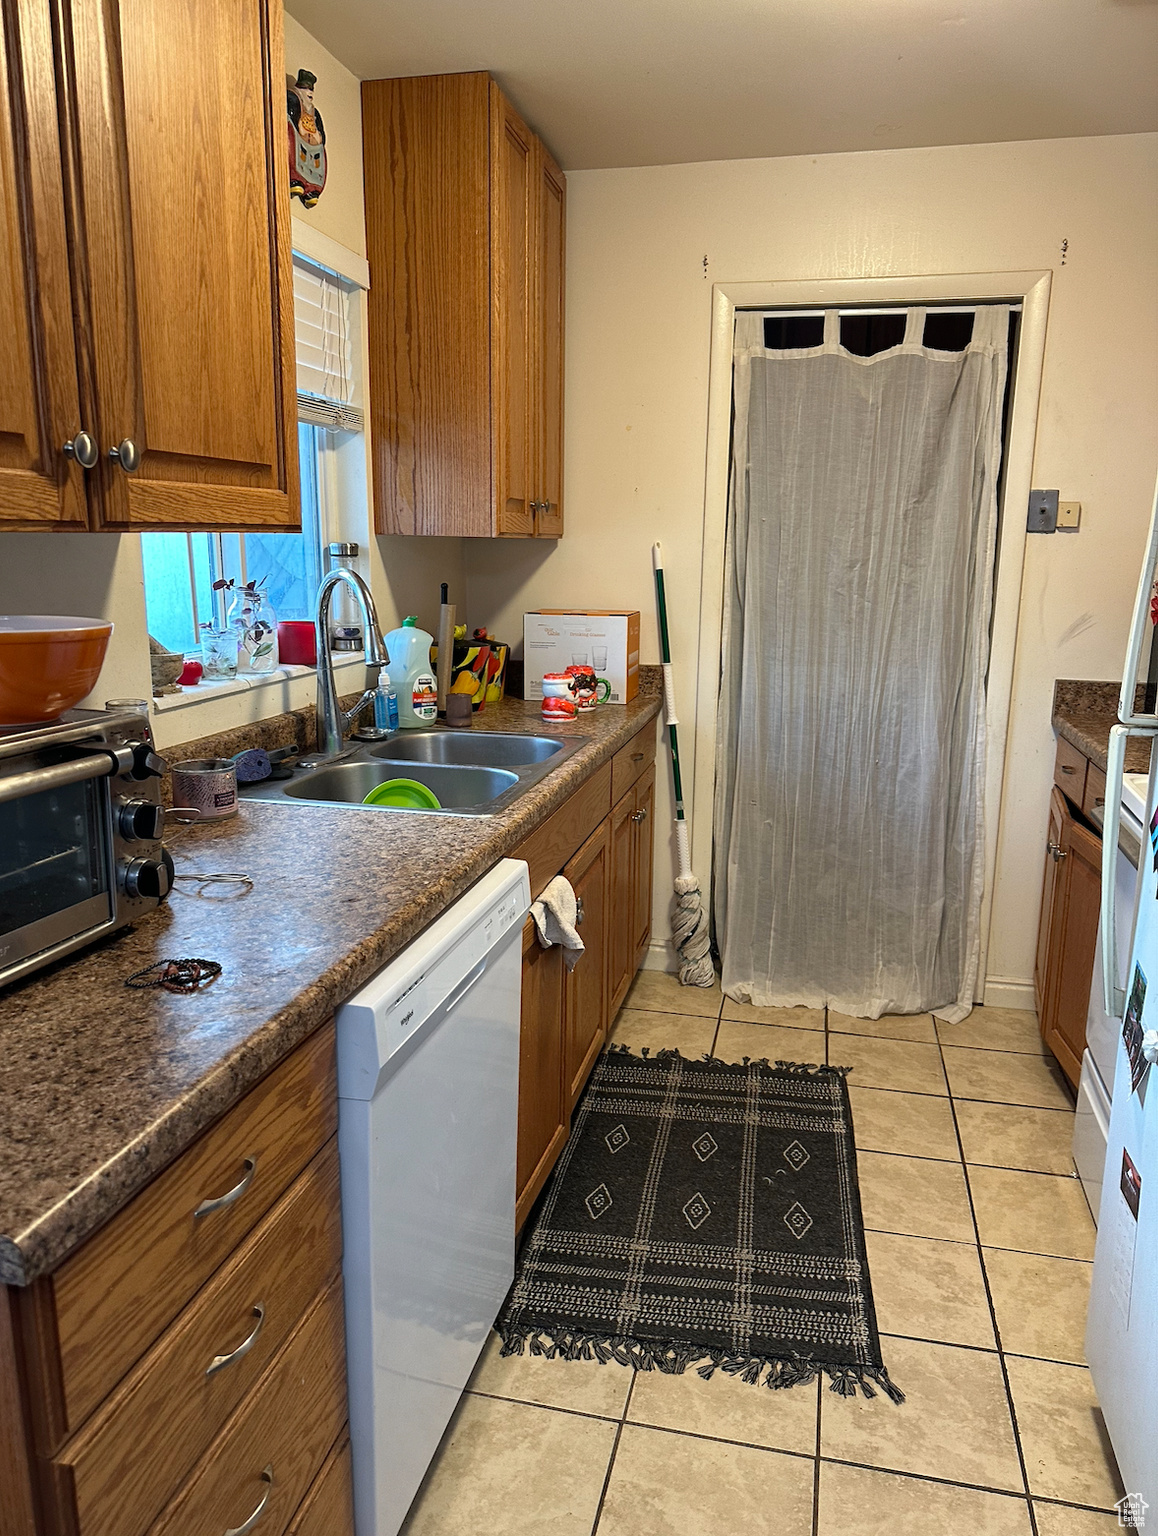 Kitchen with sink, dishwasher, and light tile floors